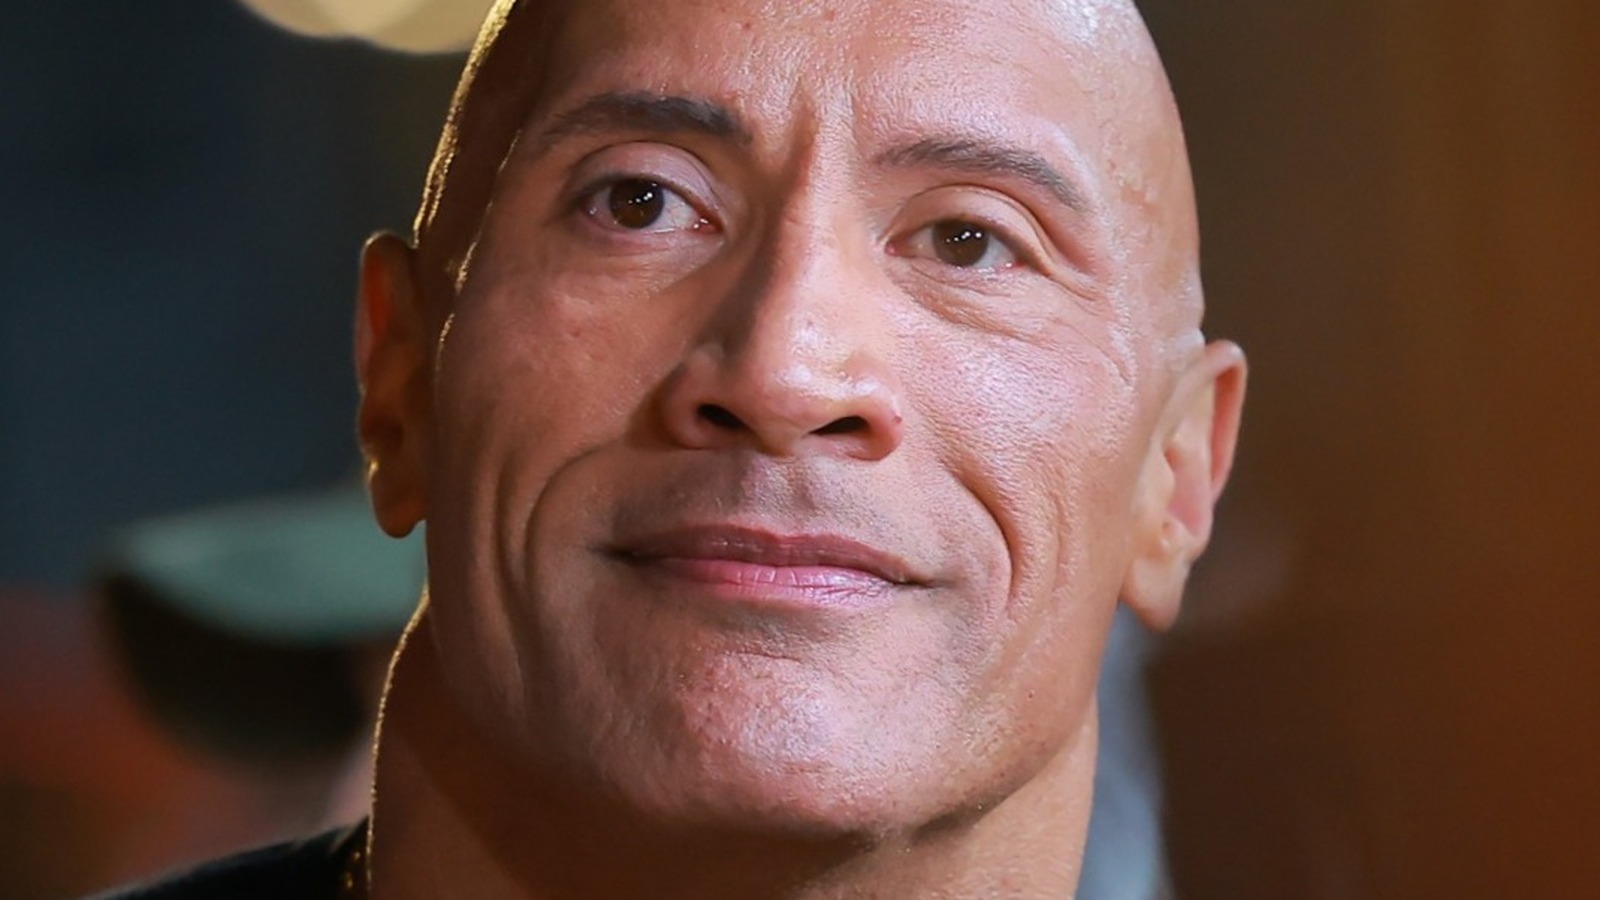 The Rock In Fortnite / The Foundation: Video Gallery